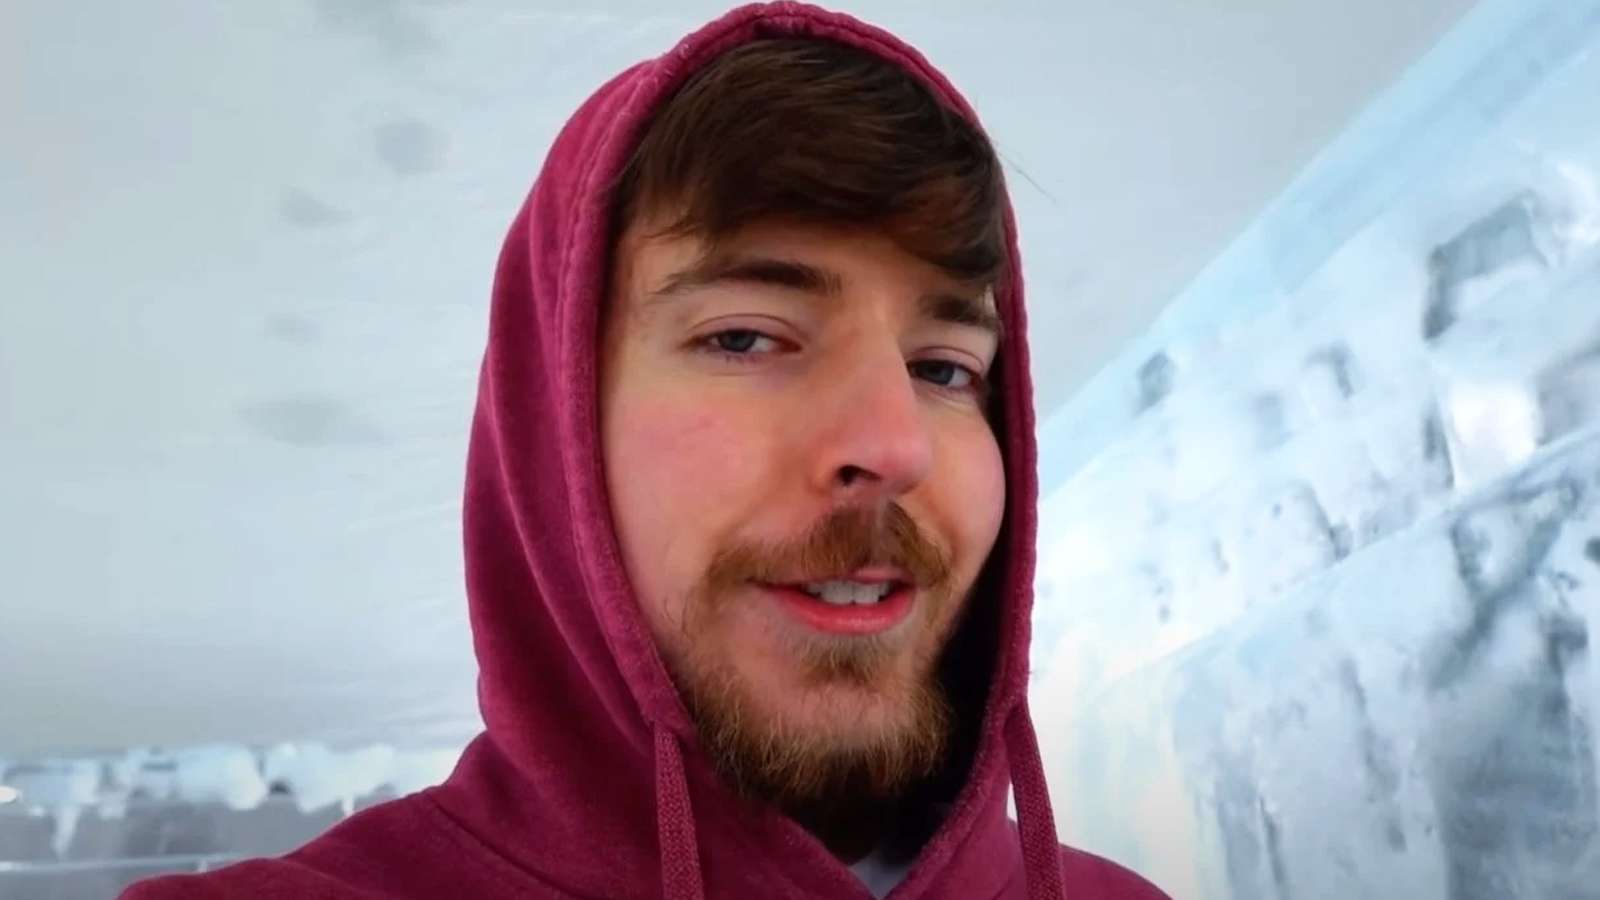 MrBeast stares at the camera in a YouTube video.